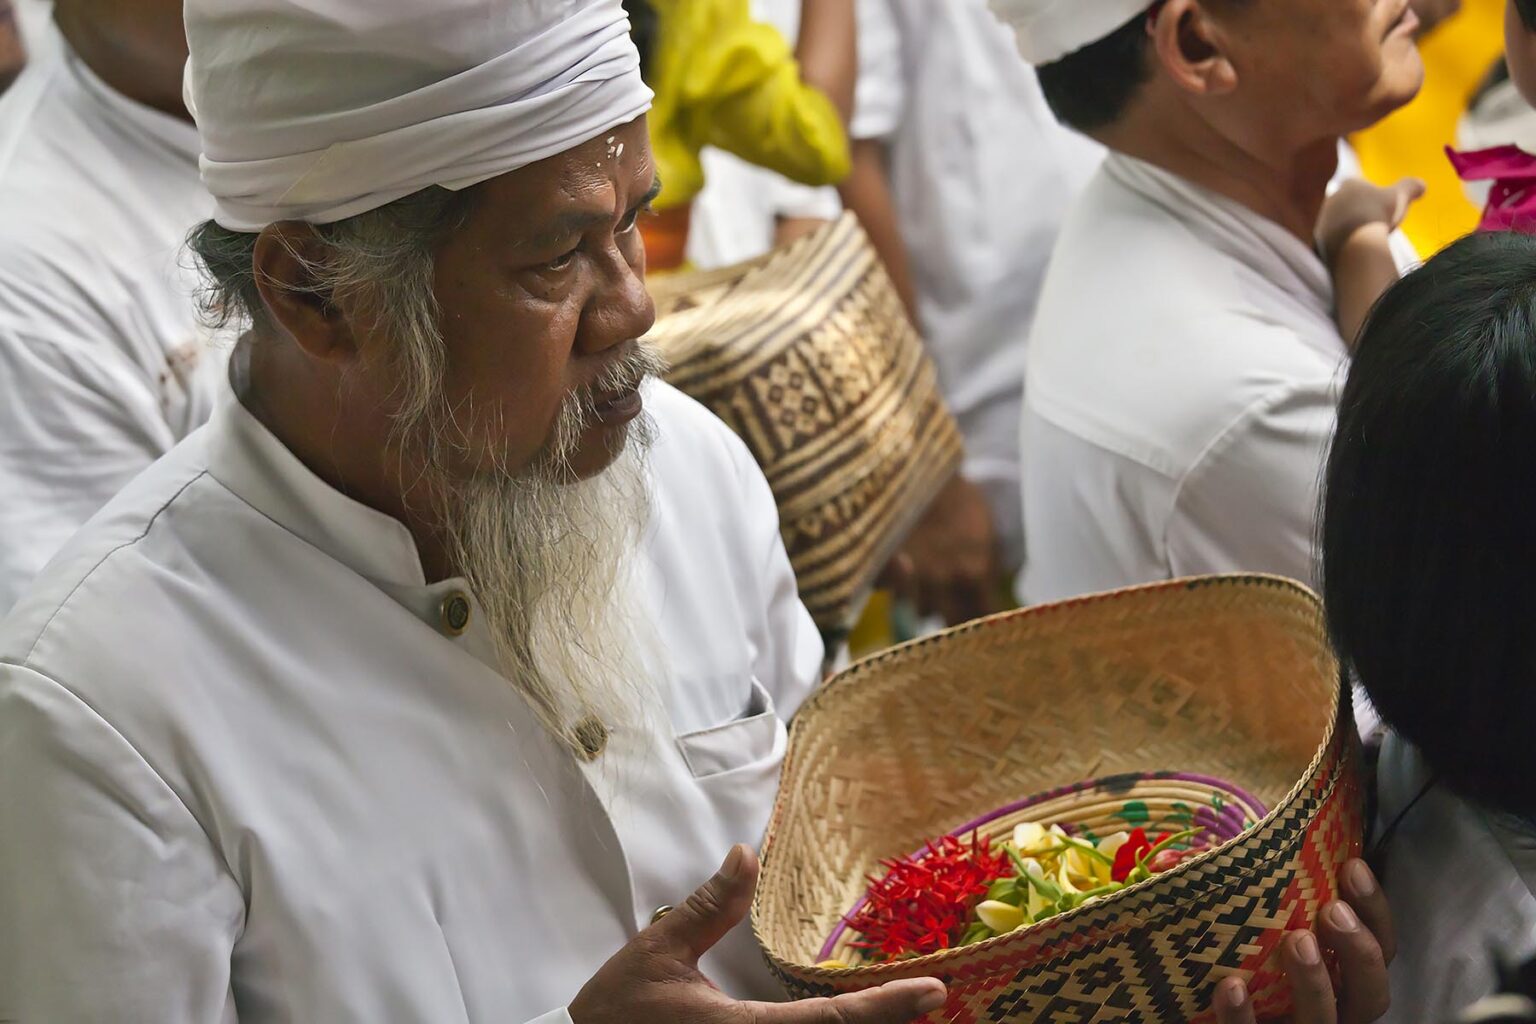 A BALINESE man brings offerings to PURA BEJI in the village of Mas during the GALUNGAN FESTIVAL - UBUD, BALI, INDONESIA